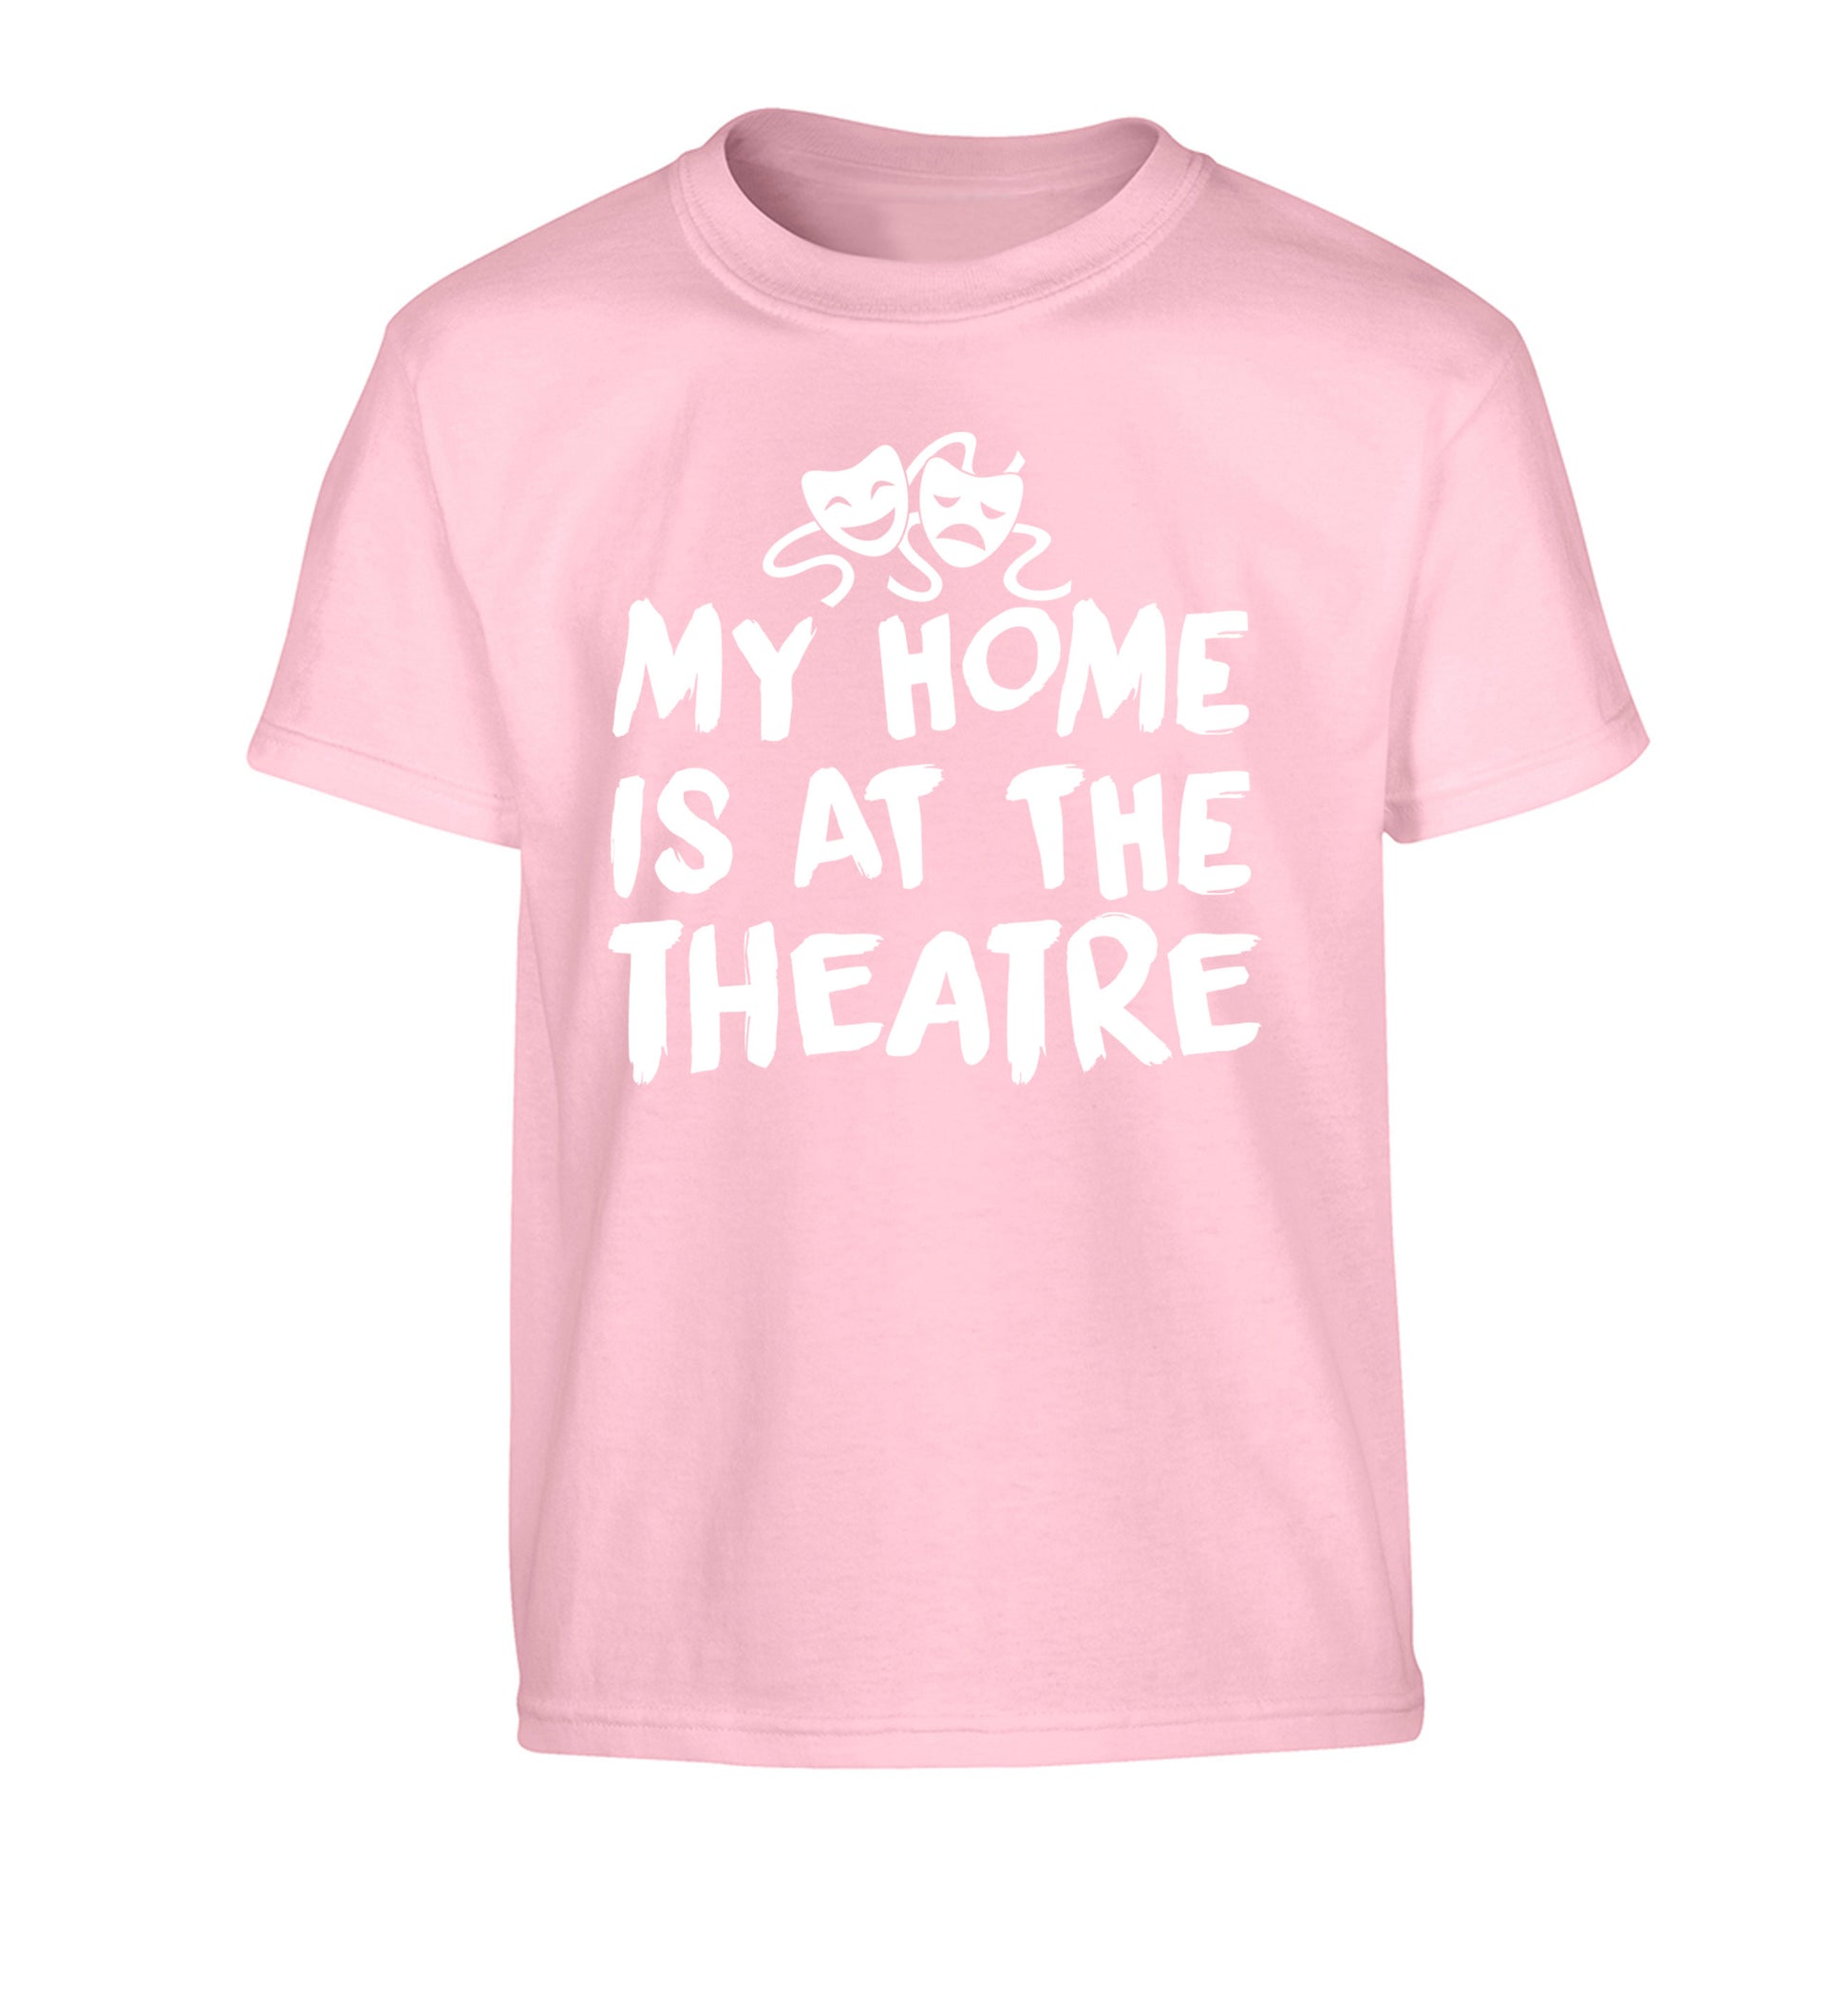 My home is at the theatre Children's light pink Tshirt 12-14 Years